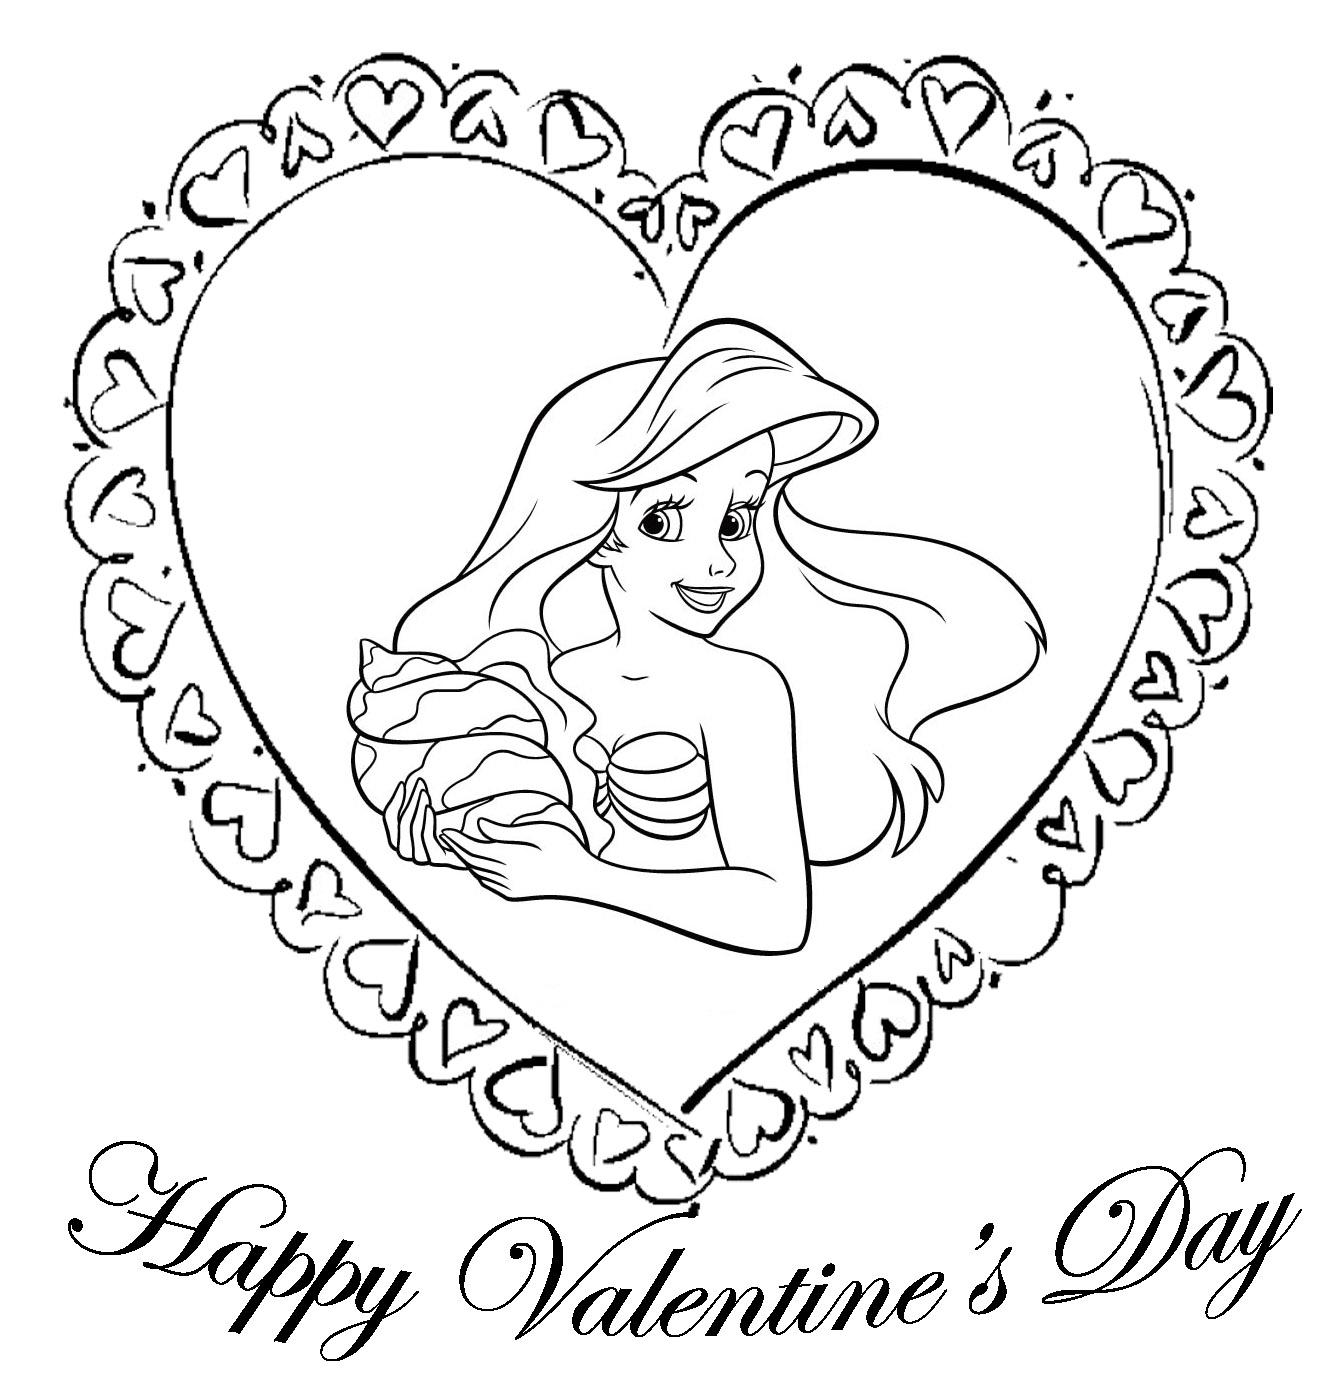 ariel-coloring-pages-to-download-and-print-for-free